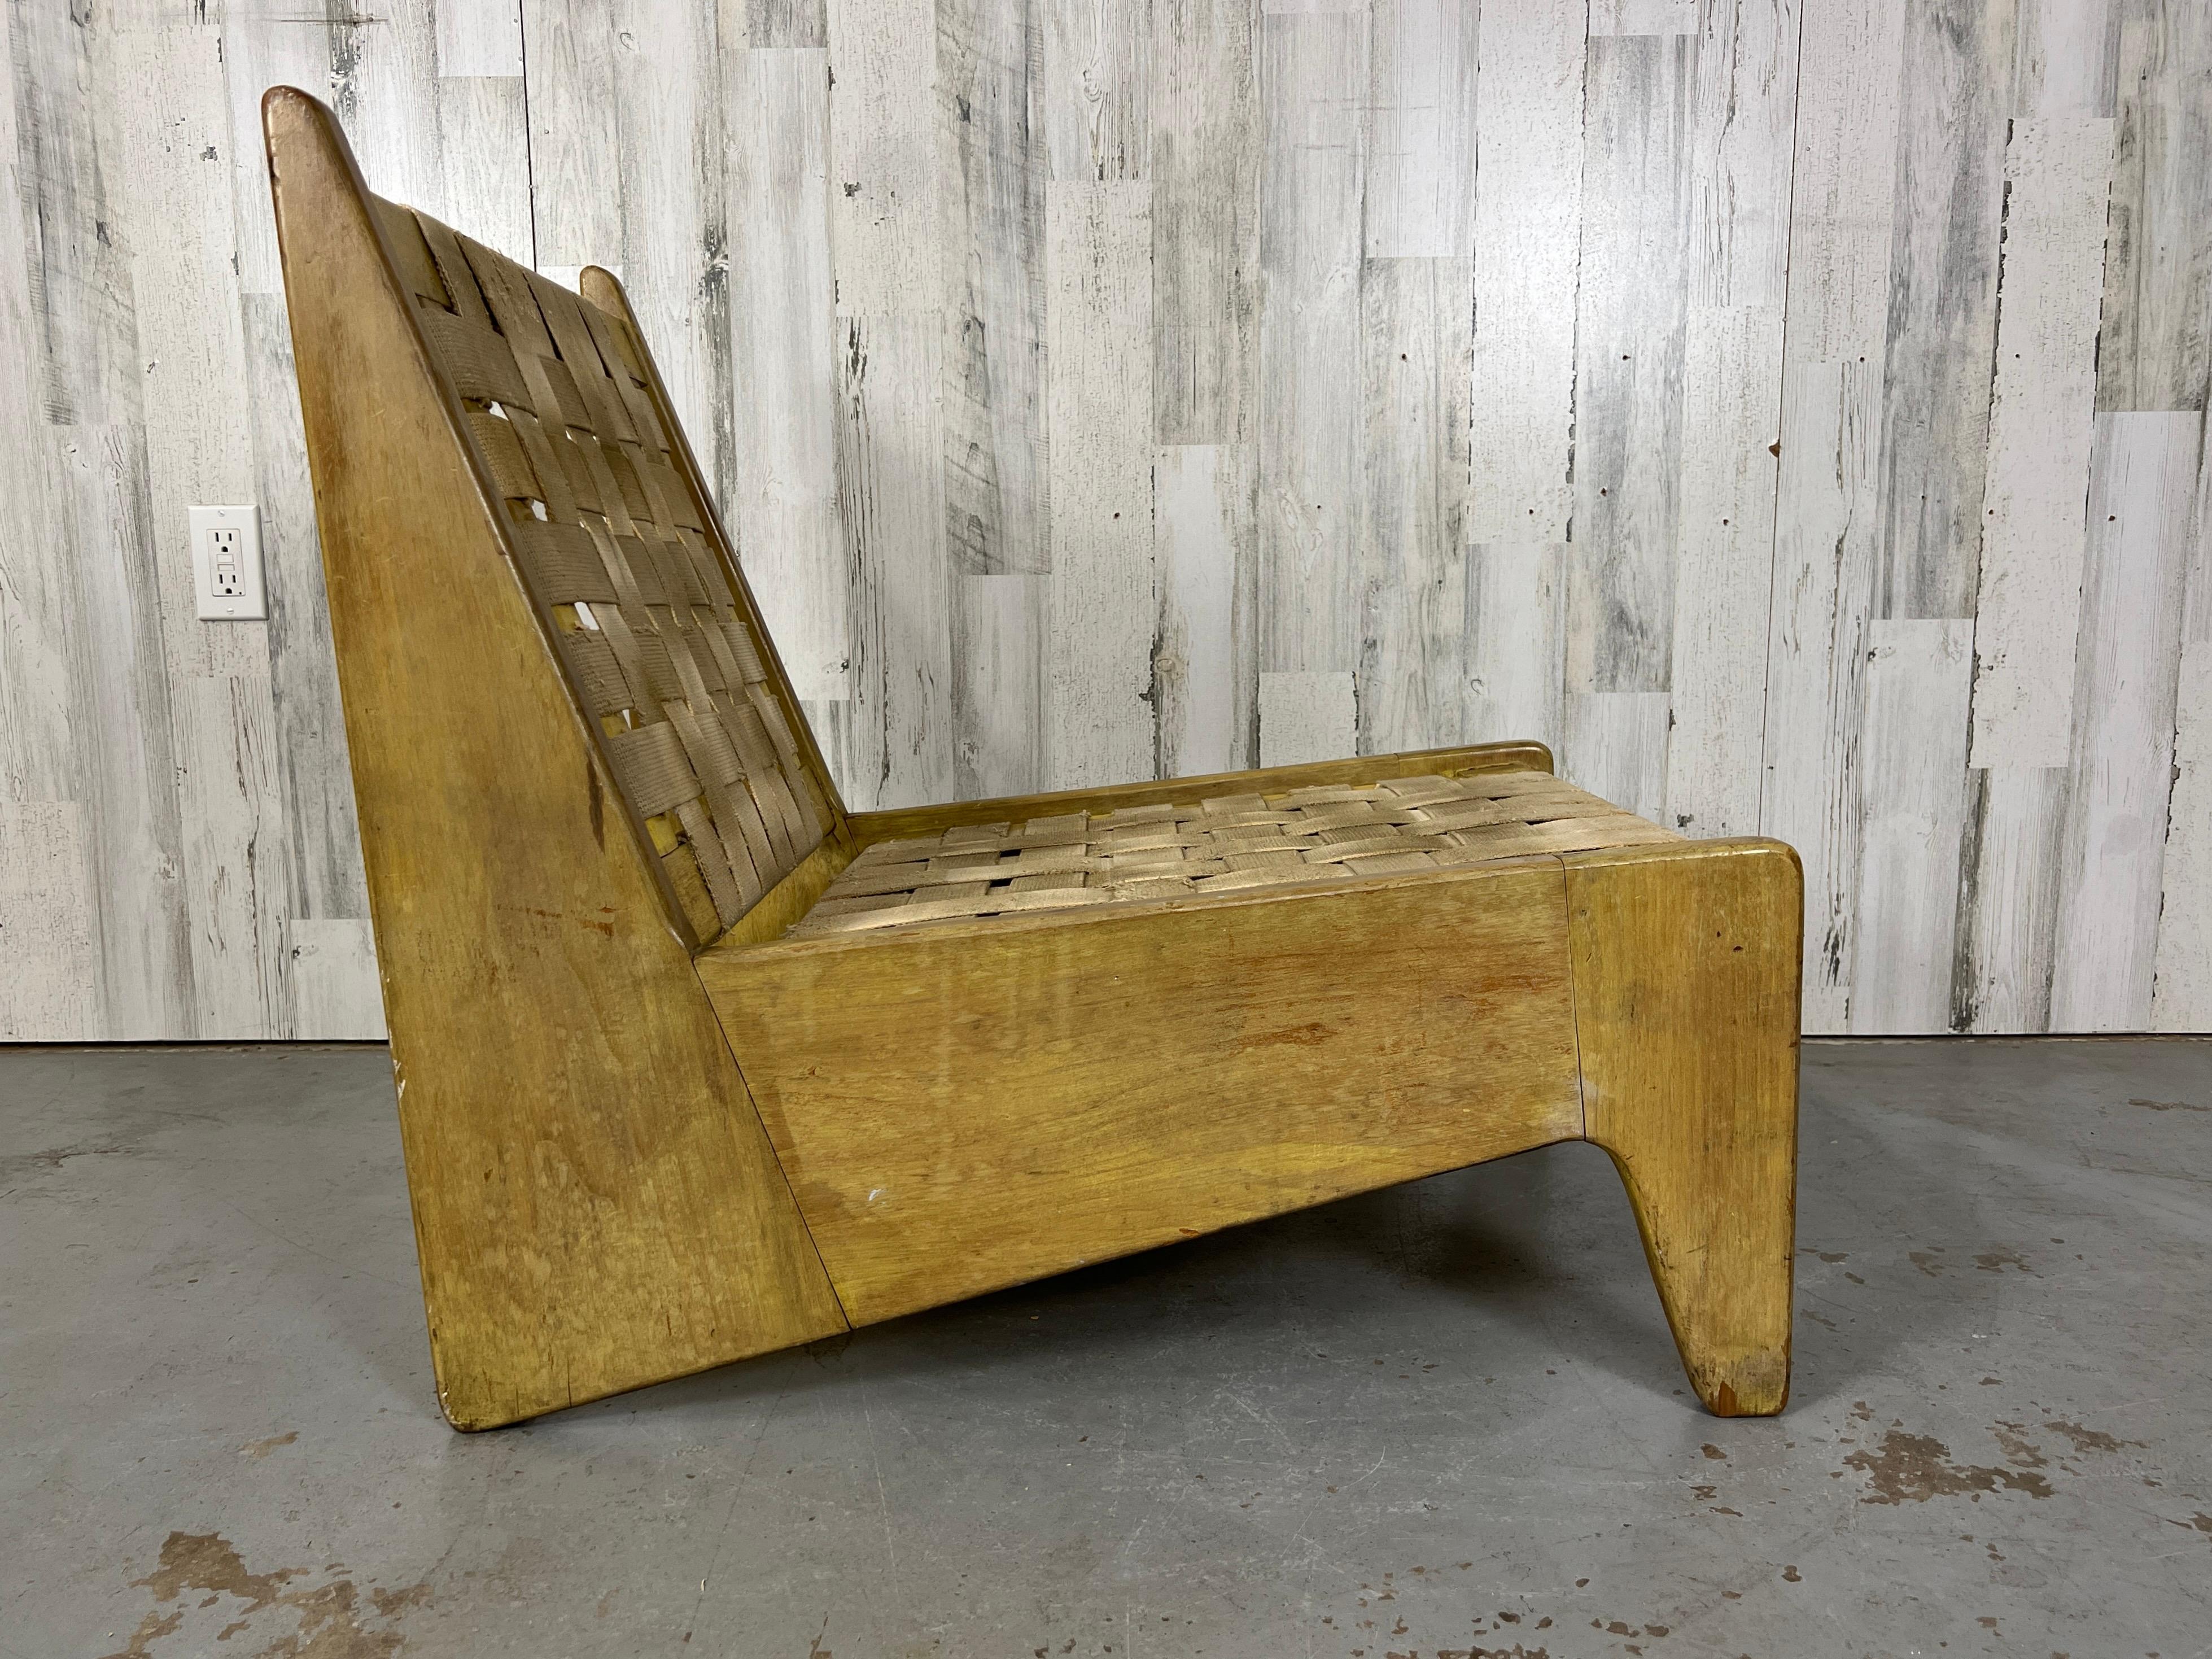 American Architectural Modernist Lounge Chair For Sale